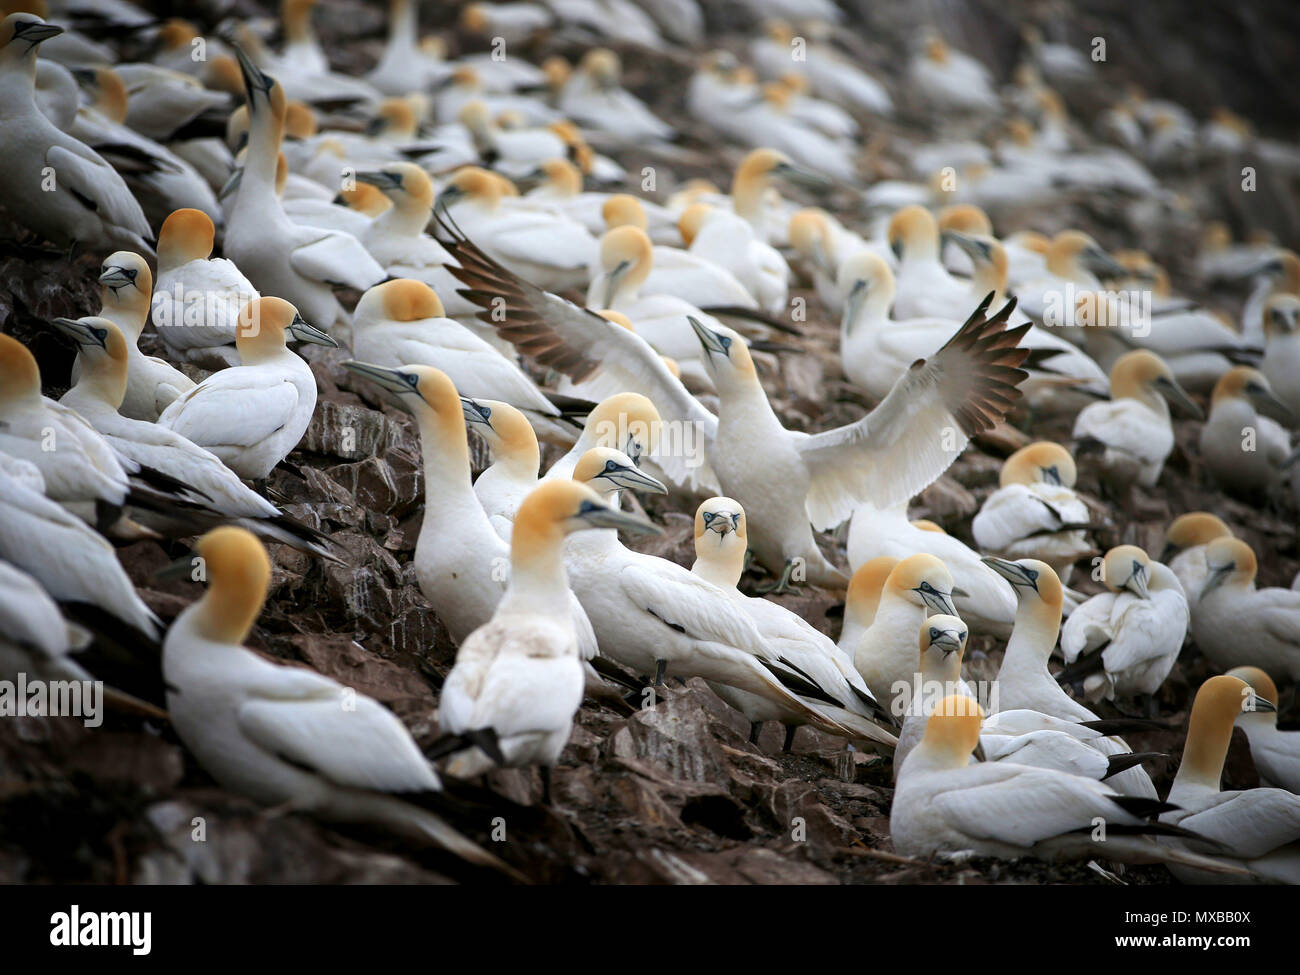 Thousands of Northern gannets gather nest material as they prepare for the new breeding season on the Bass Rock, in the Firth of Forth, forming the largest single-island colony of gannets in the world. Stock Photo